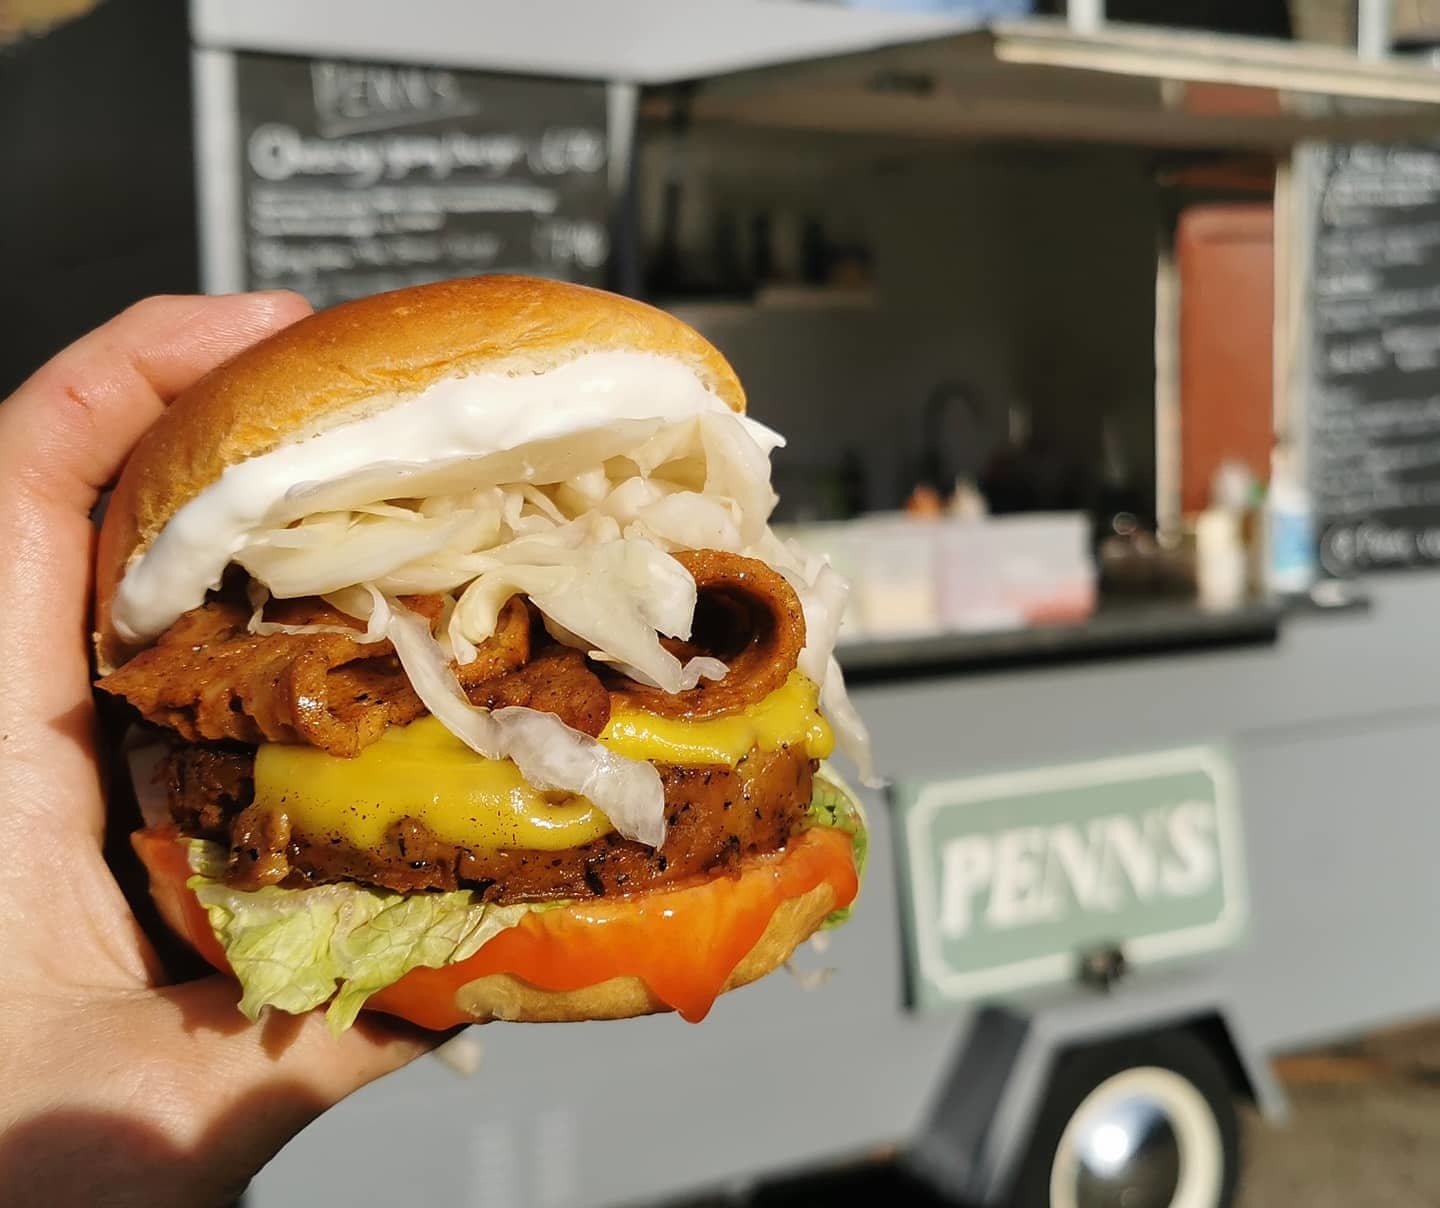 Penns Vegan launches food truck under Jumbo in Colchester